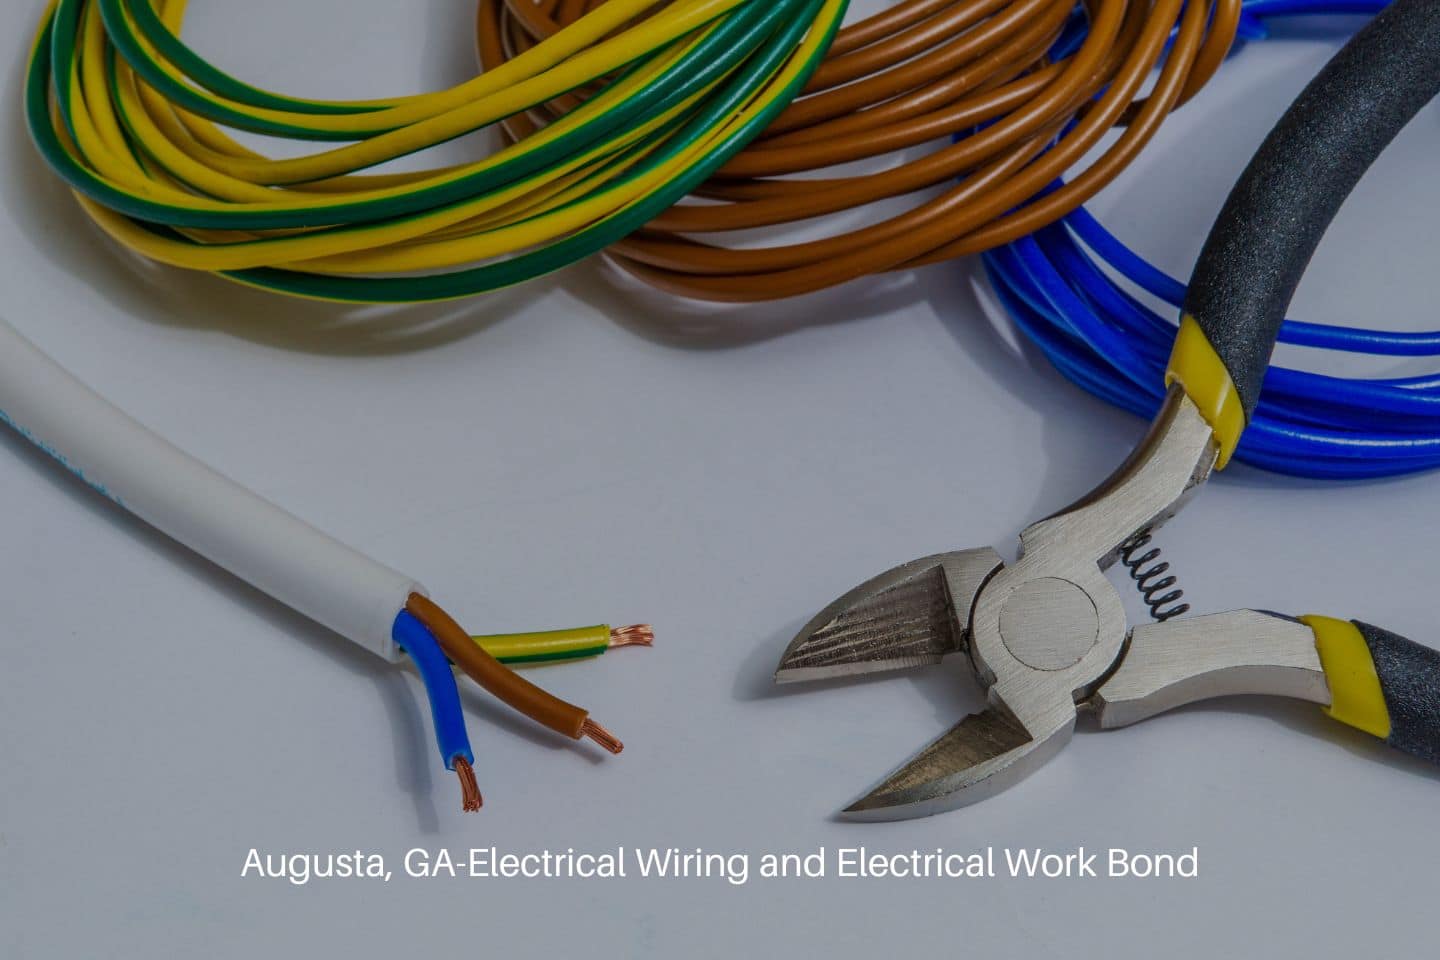 Augusta, GA-Electrical Wiring and Electrical Work Bond - Spare parts, tool and wires for replacement or repair of electrical equipment.